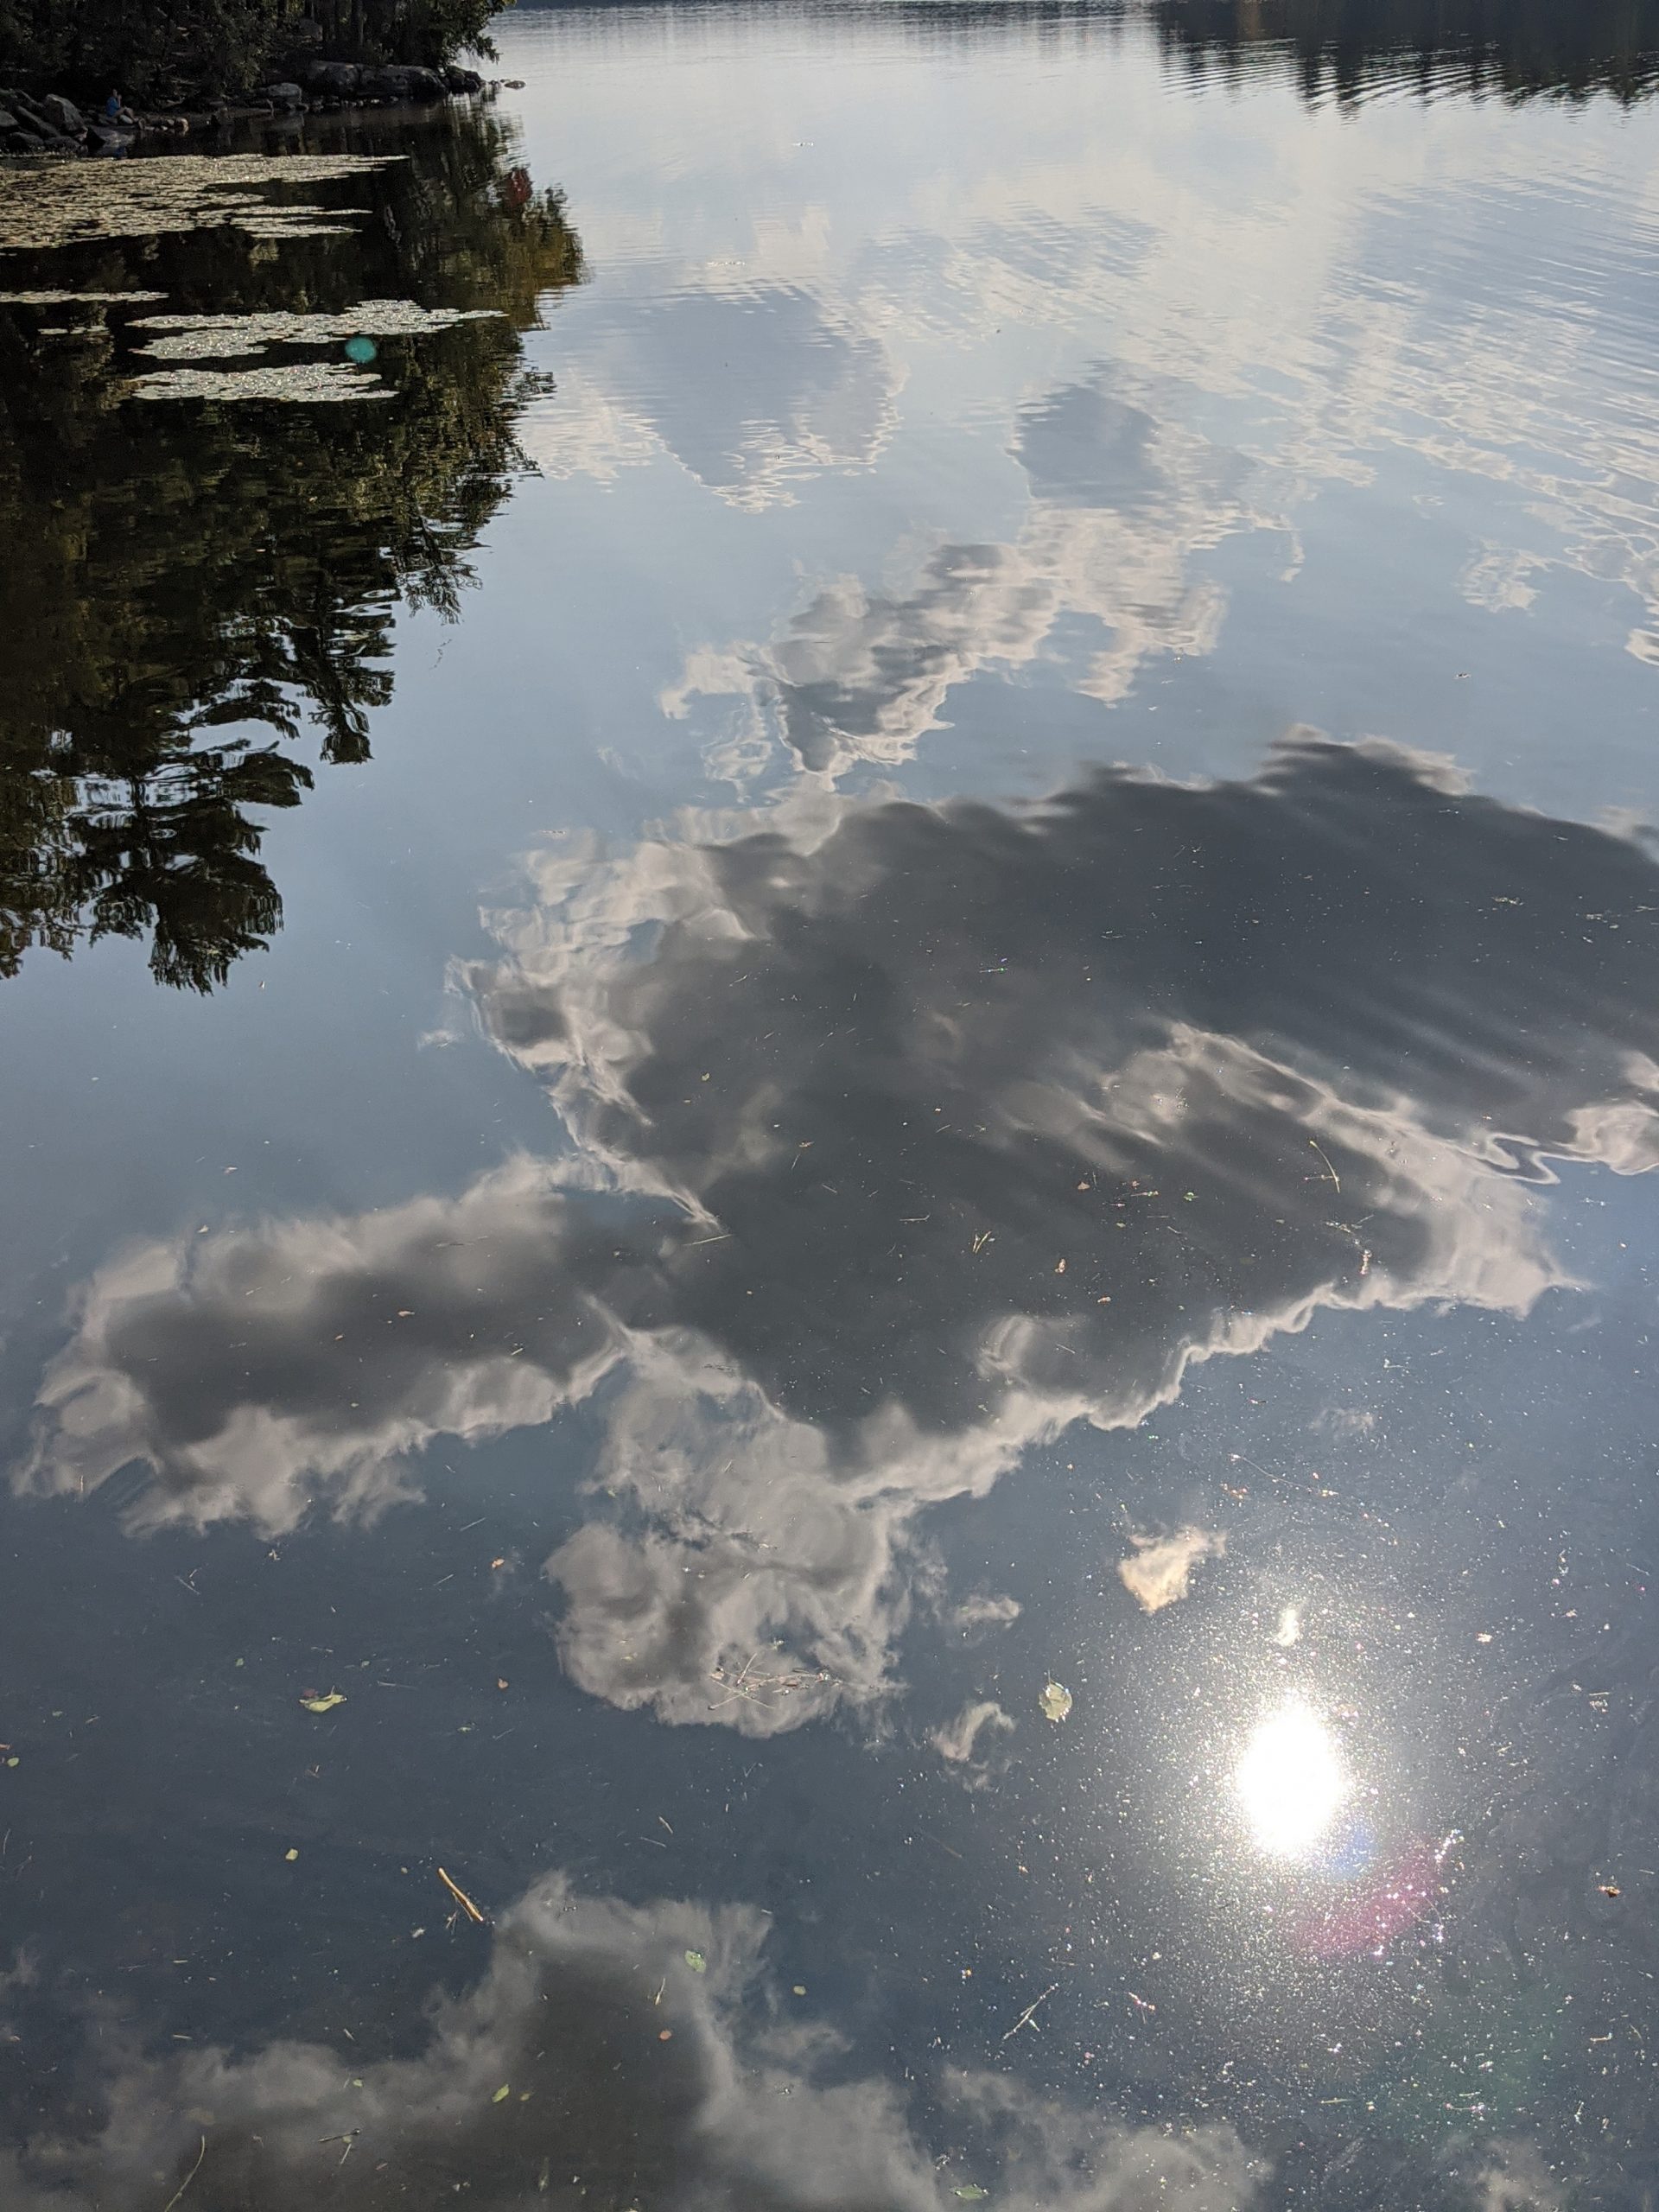 Clouds reflected in water - Ashland State Park - September 2020